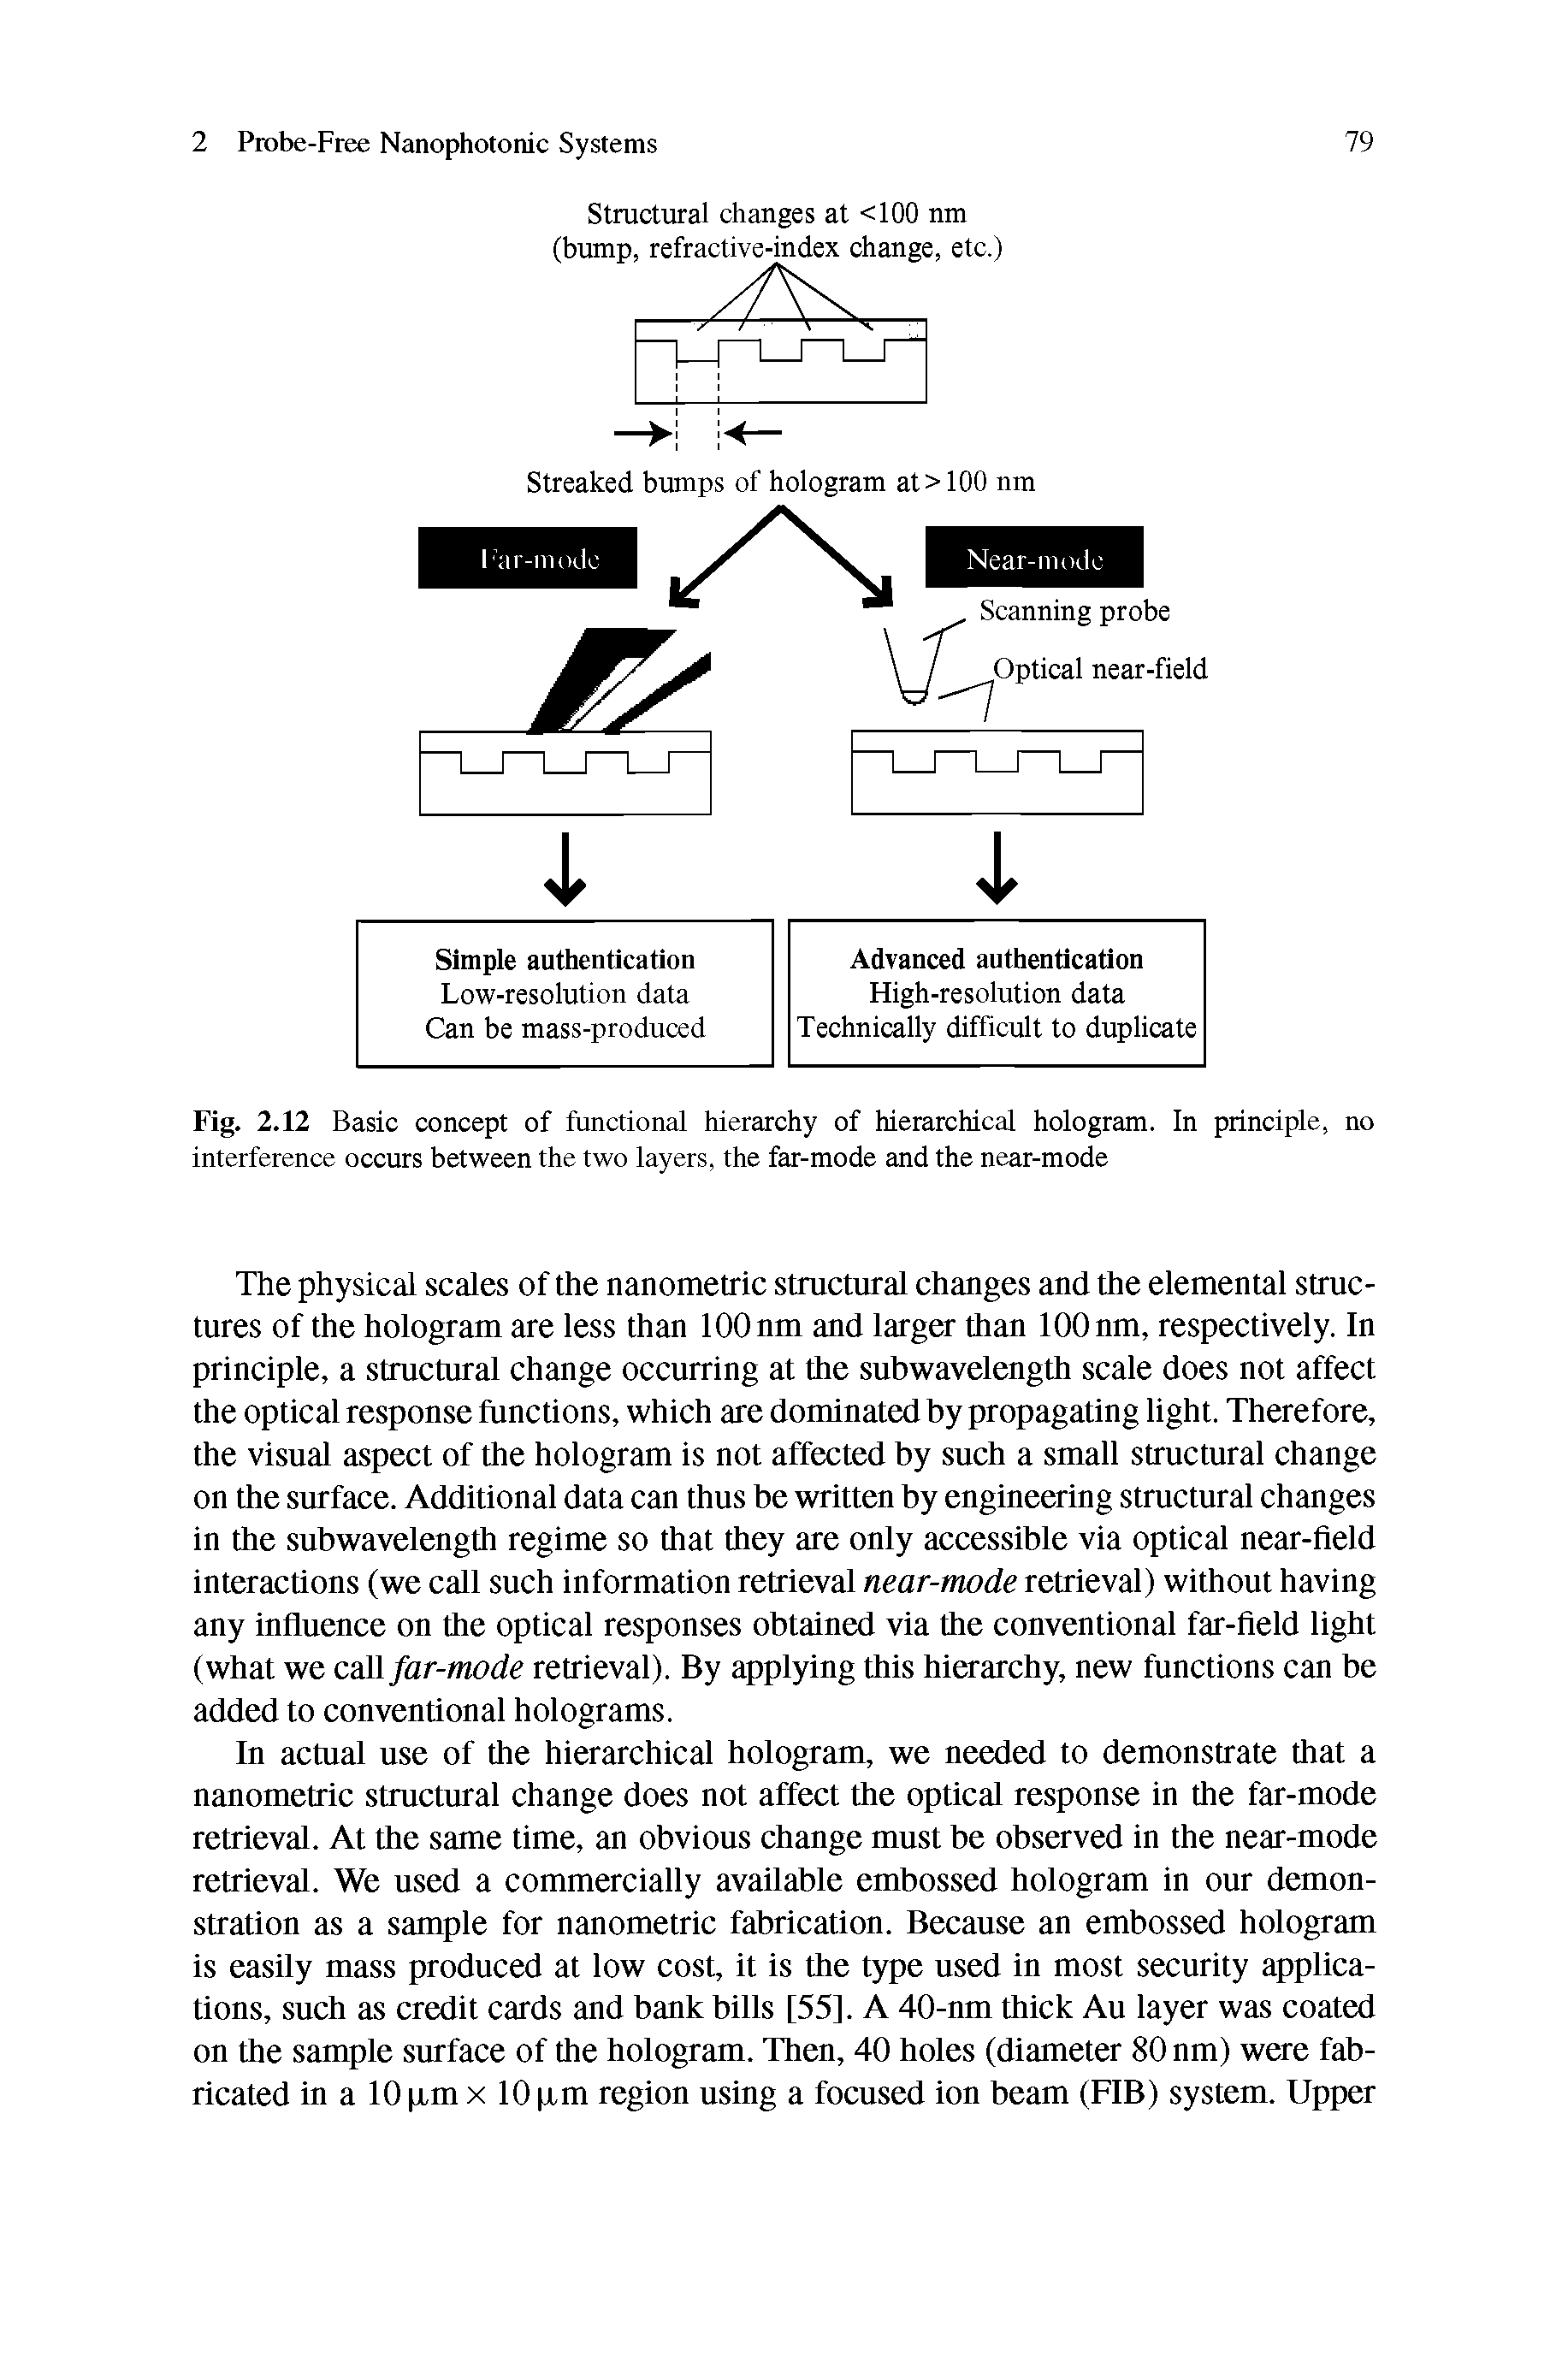 Fig. 2.12 Basic concept of functional hierarchy of hierarchical hologram. In principle, no interference occurs between the two layers, the far-mode and the near-mode...